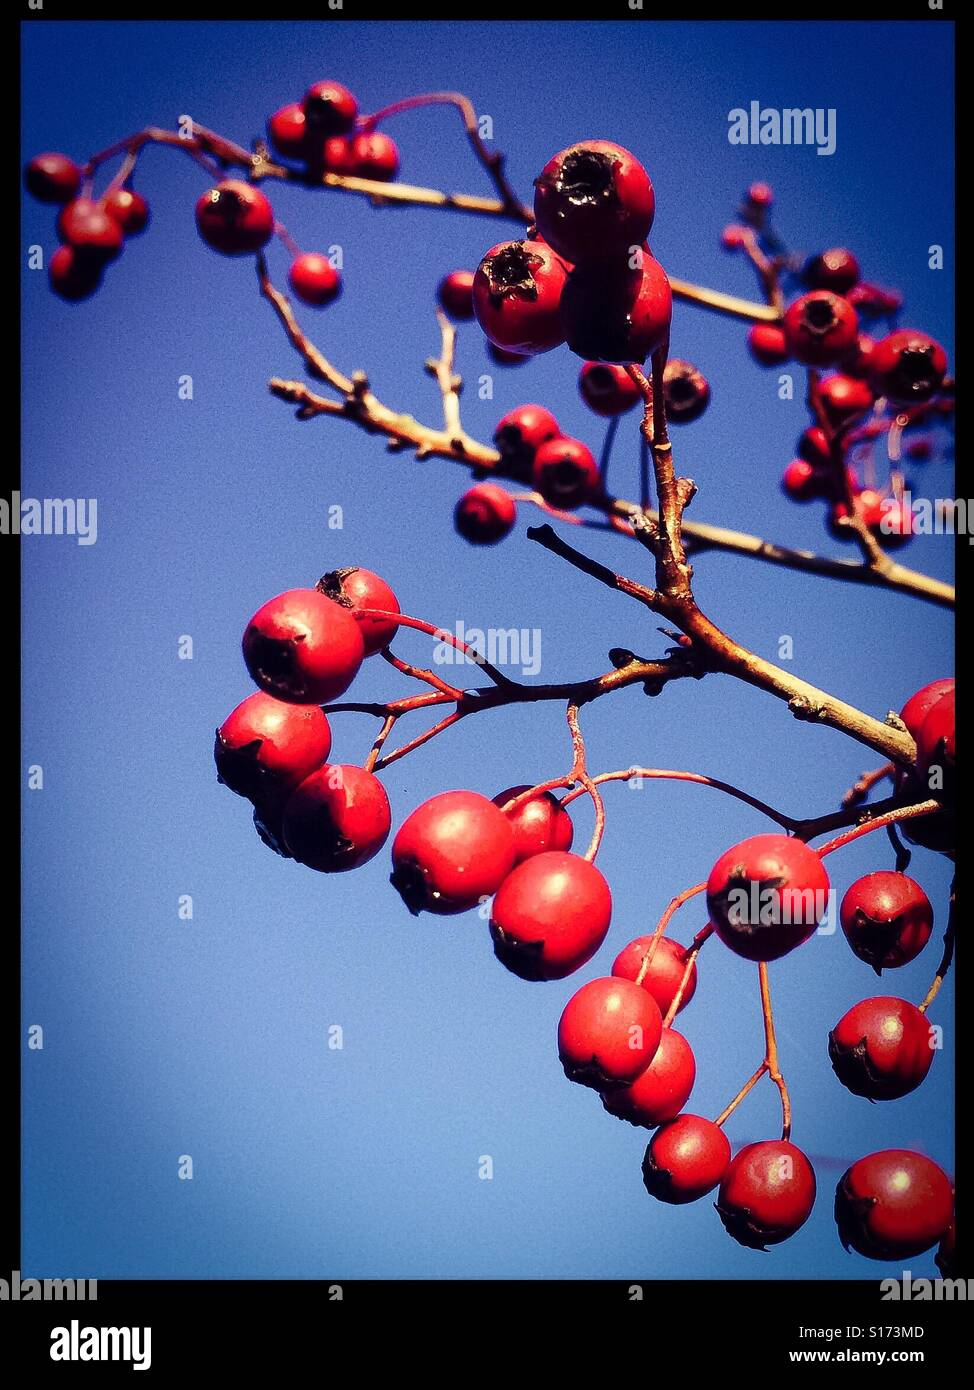 Red berries against a blue sky Stock Photo